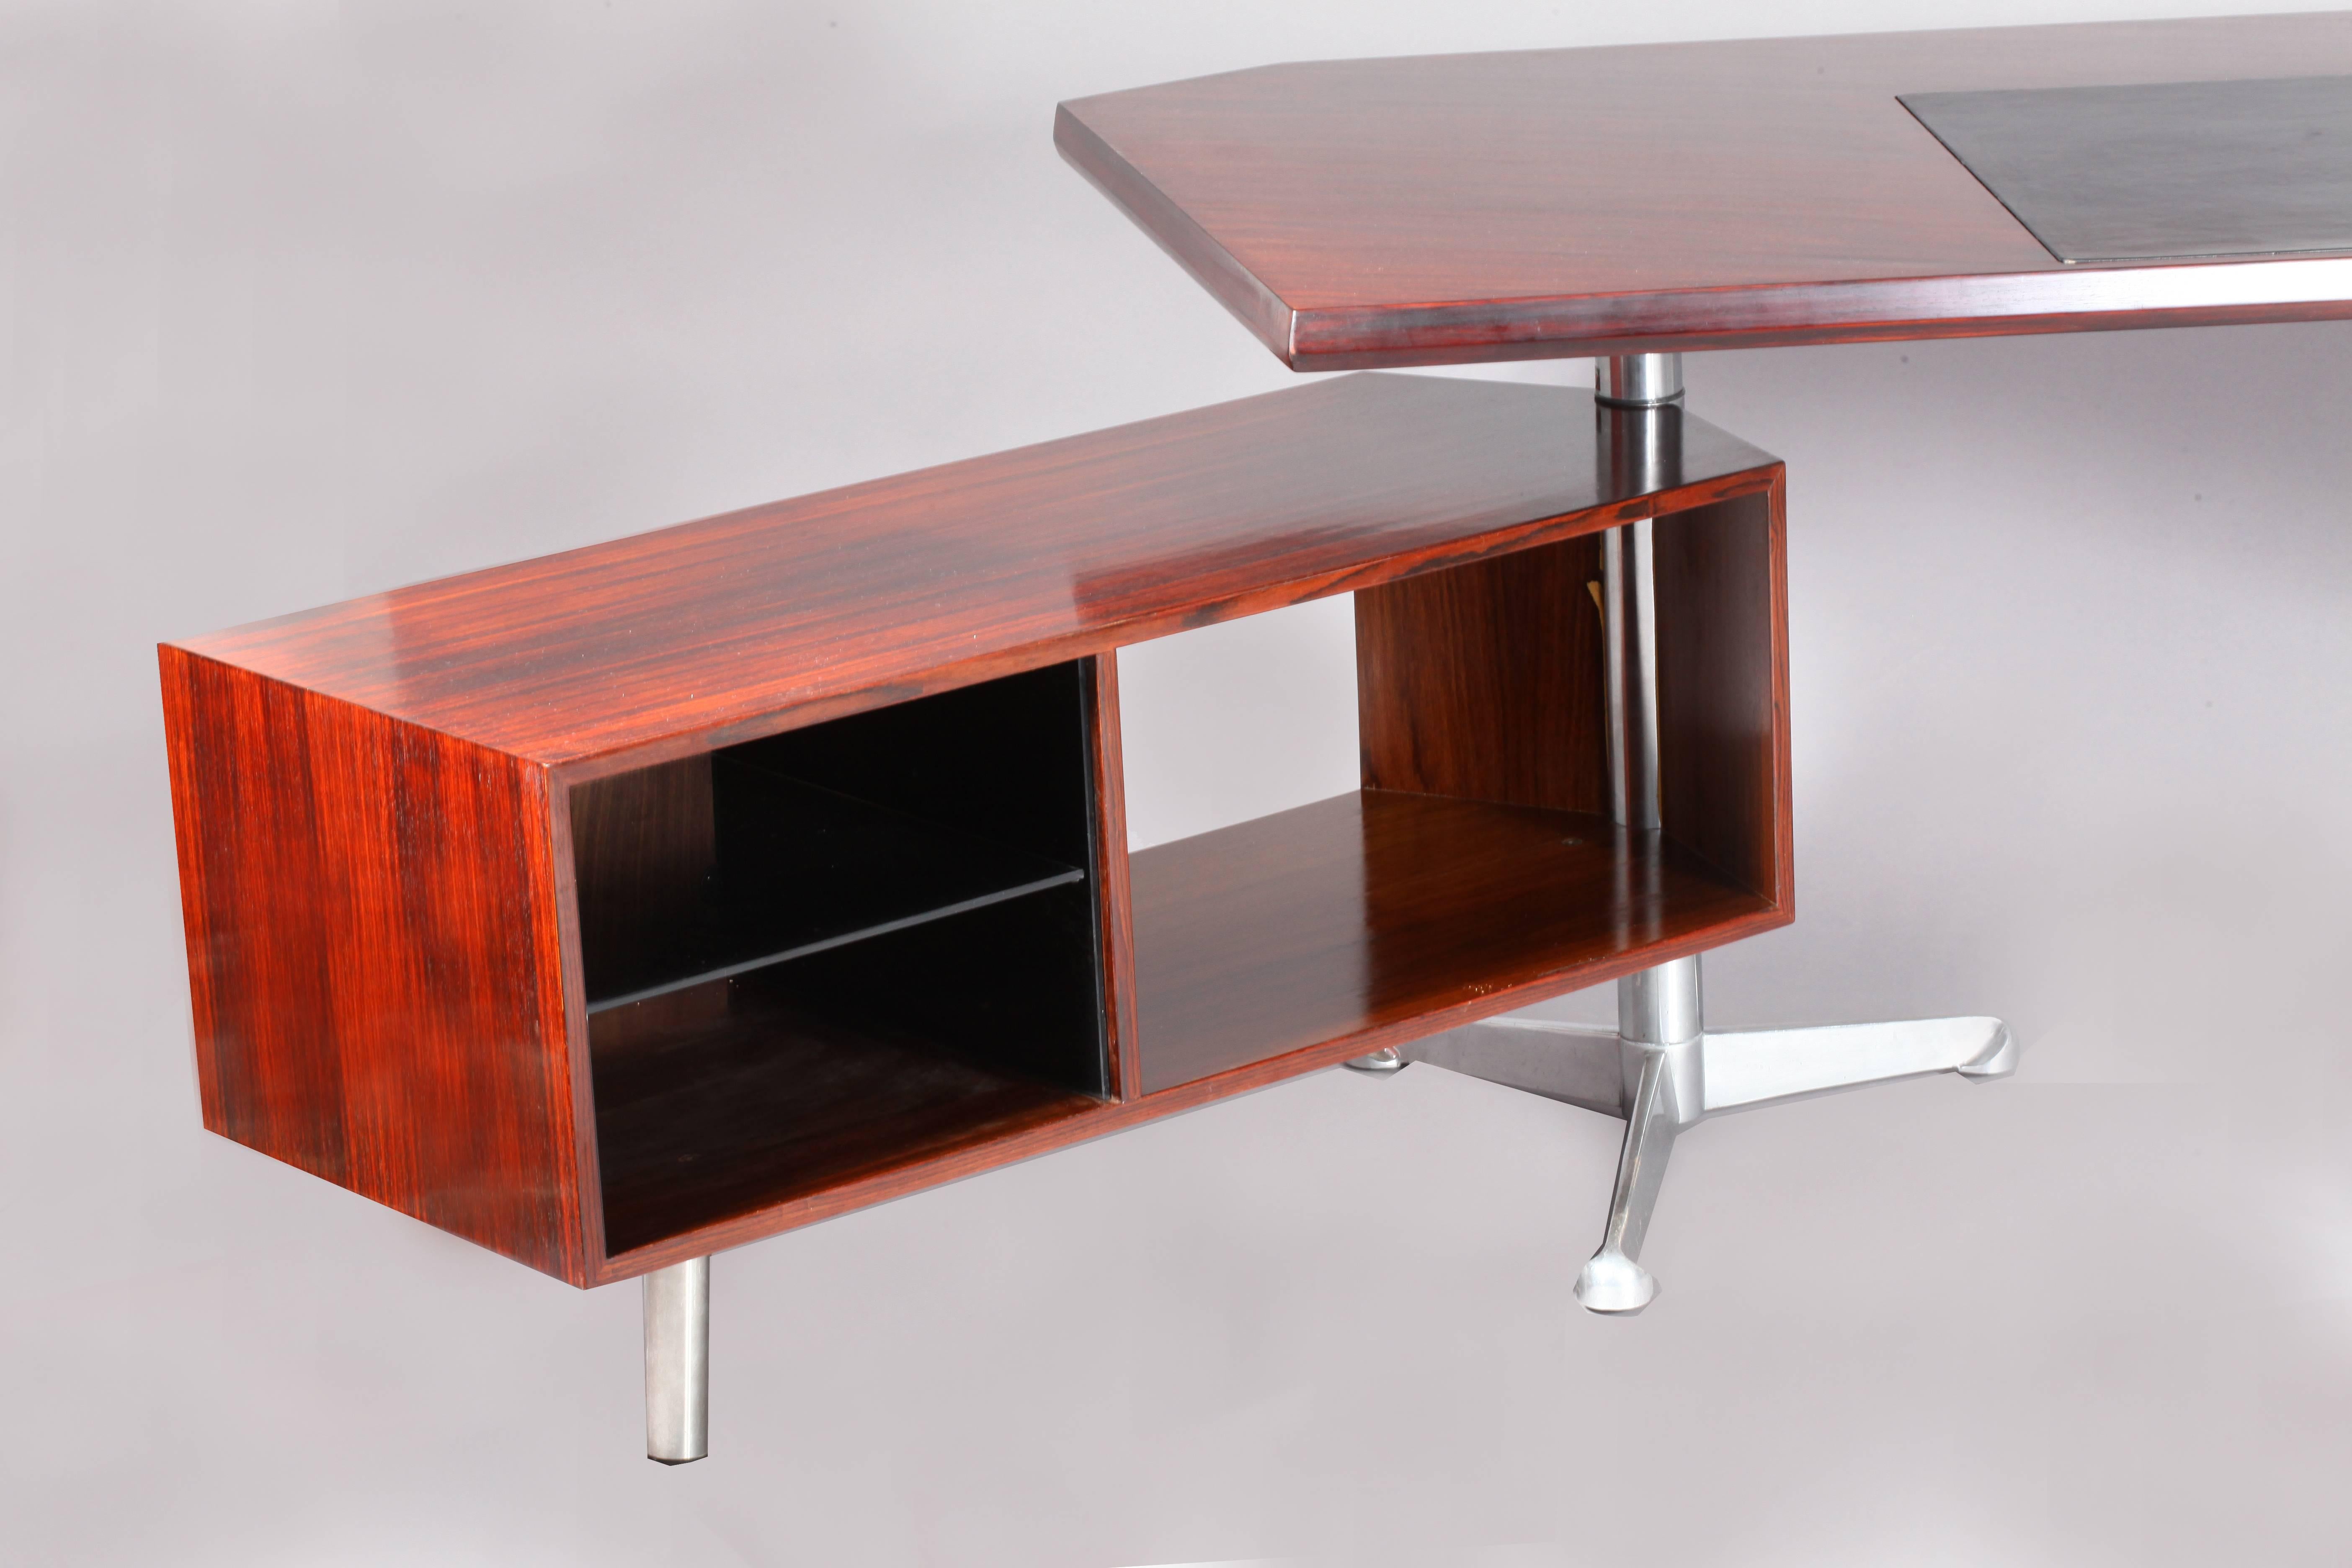 Architectural rosewood executive desk by Osvaldo Borsani for Tecno Milano. rosewood hand polish with wood grain showing through. Floating pedestal on right side and longer return on left, both rotate 360 degrees. Original working lock on the right